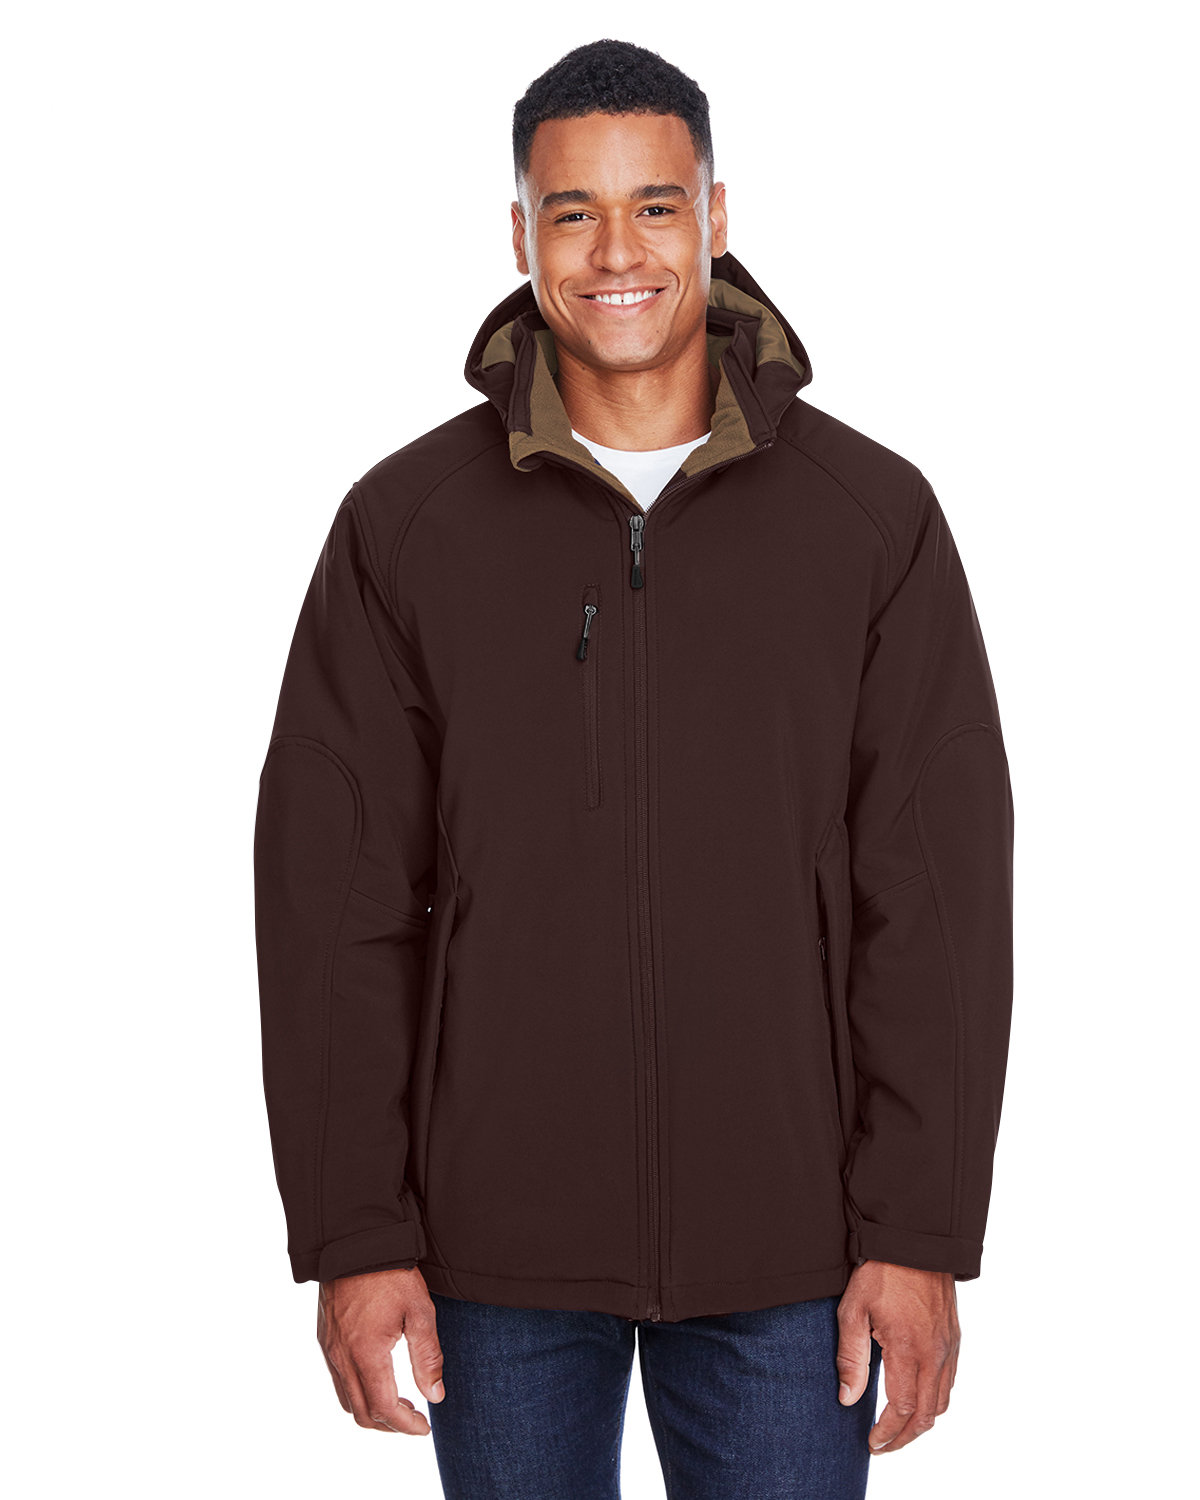 North End Men's Glacier Insulated Three-Layer Fleece Bonded Soft Shell Jacket with Detachable Hood DARK CHOCOLATE 